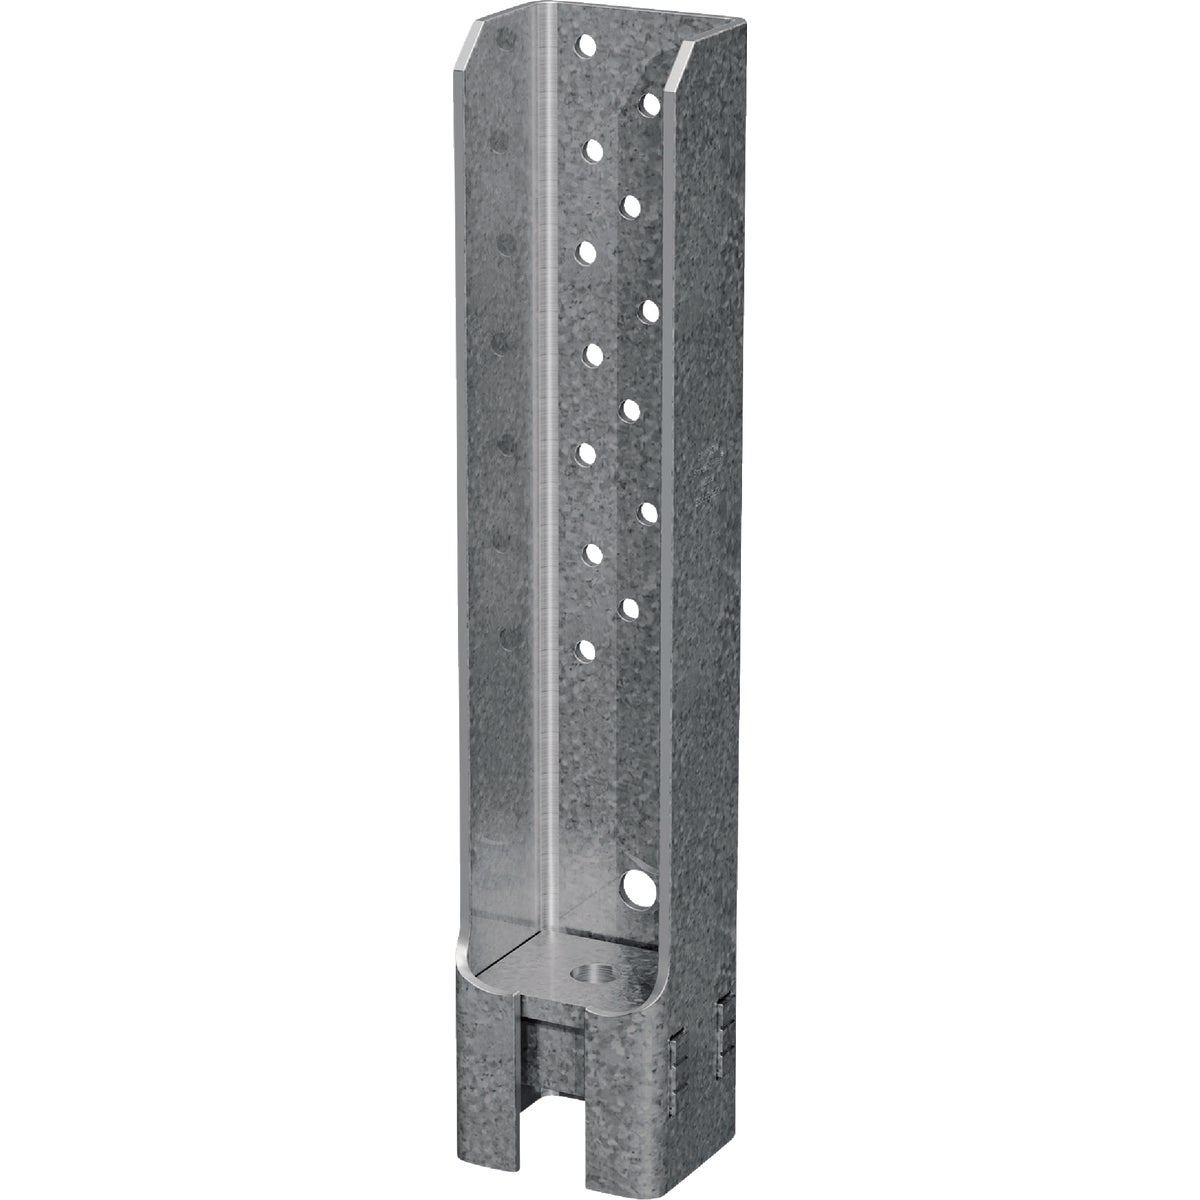 Simpson Strong-Tie 14 In. 7 ga Galvanized Holdown with SDS Screws